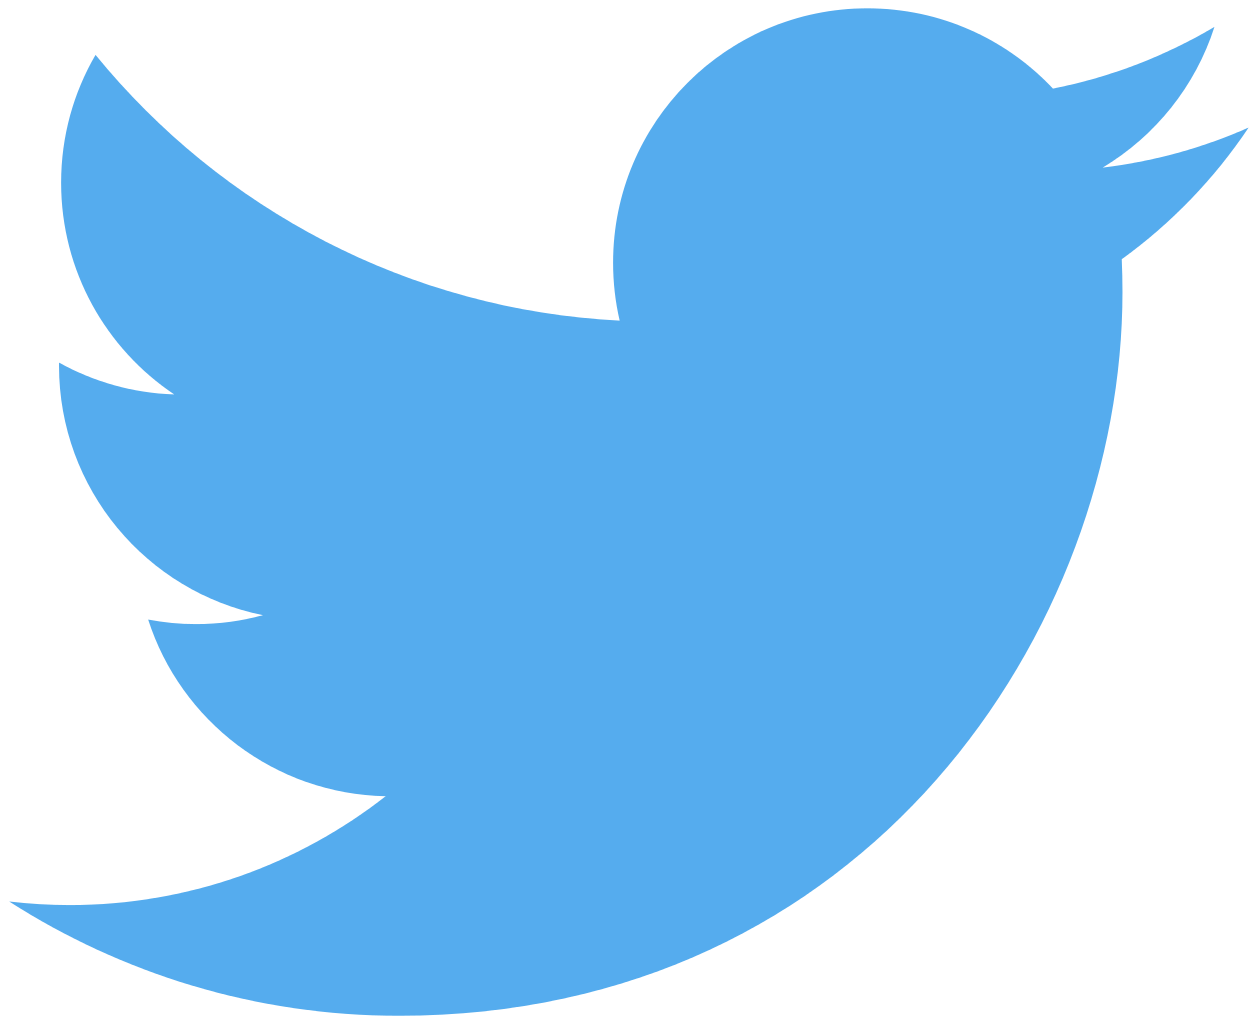 Twitter bird icon png. Transparent images pluspng smicon